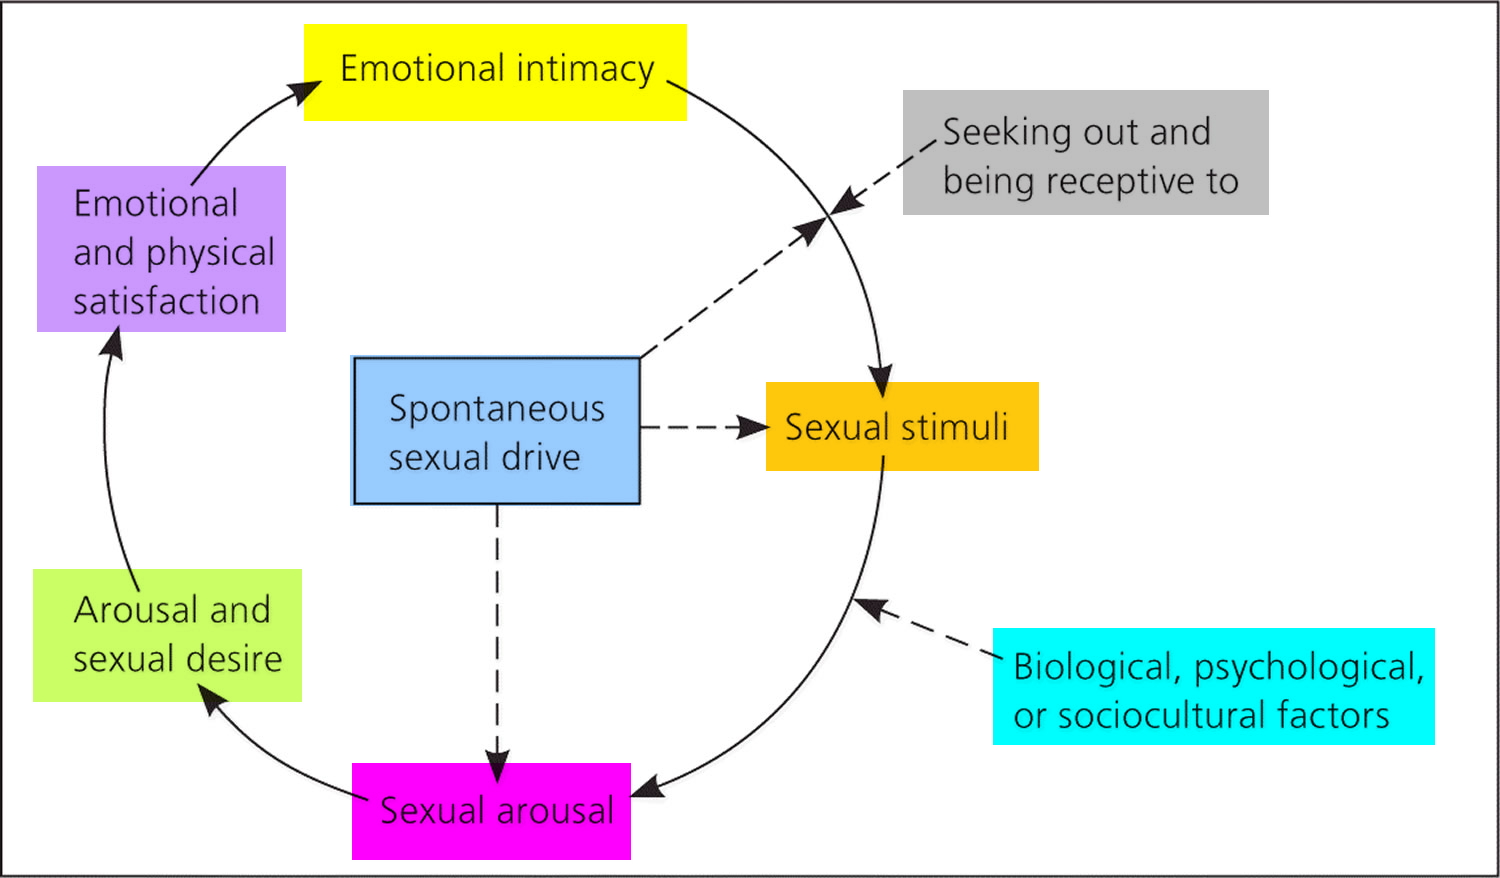 Overview of the Sexual Response Cycle